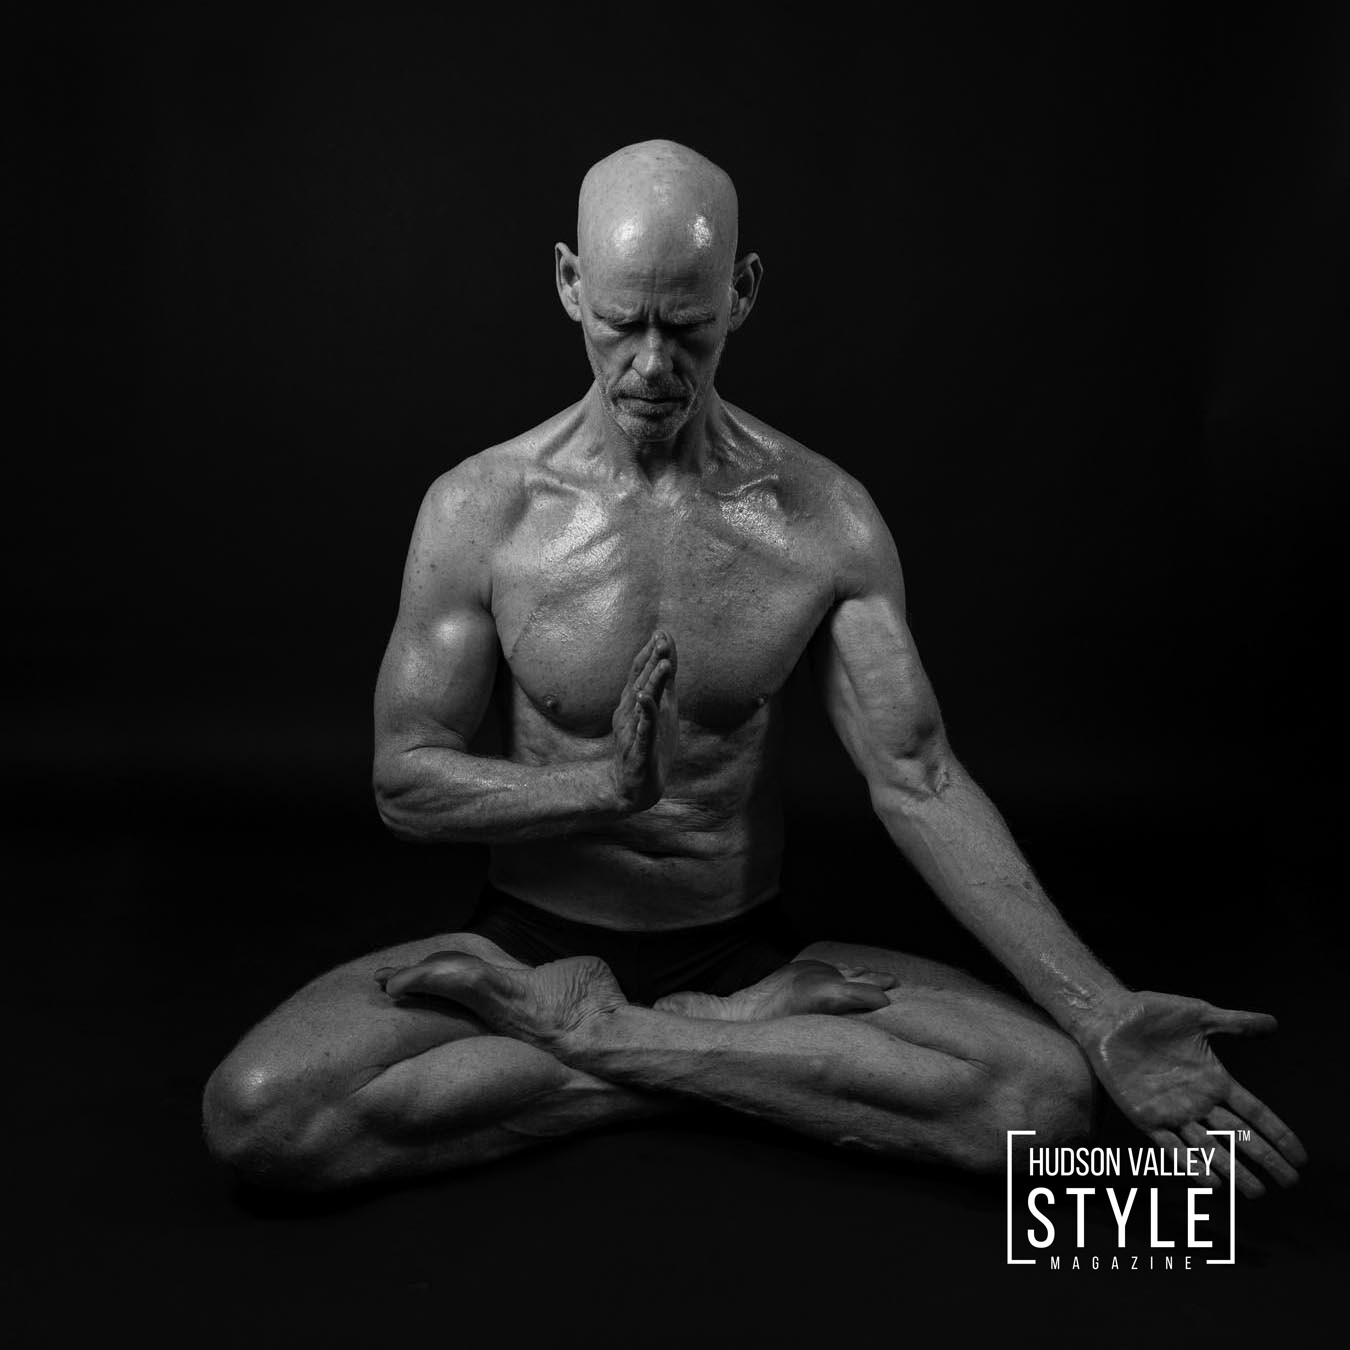 Body, Mind & Spirit, with Health & Wellness Coach, Michael Murphy – Interview and Photography by Maxwell Alexander, EIC, Hudson Valley Style Magazine